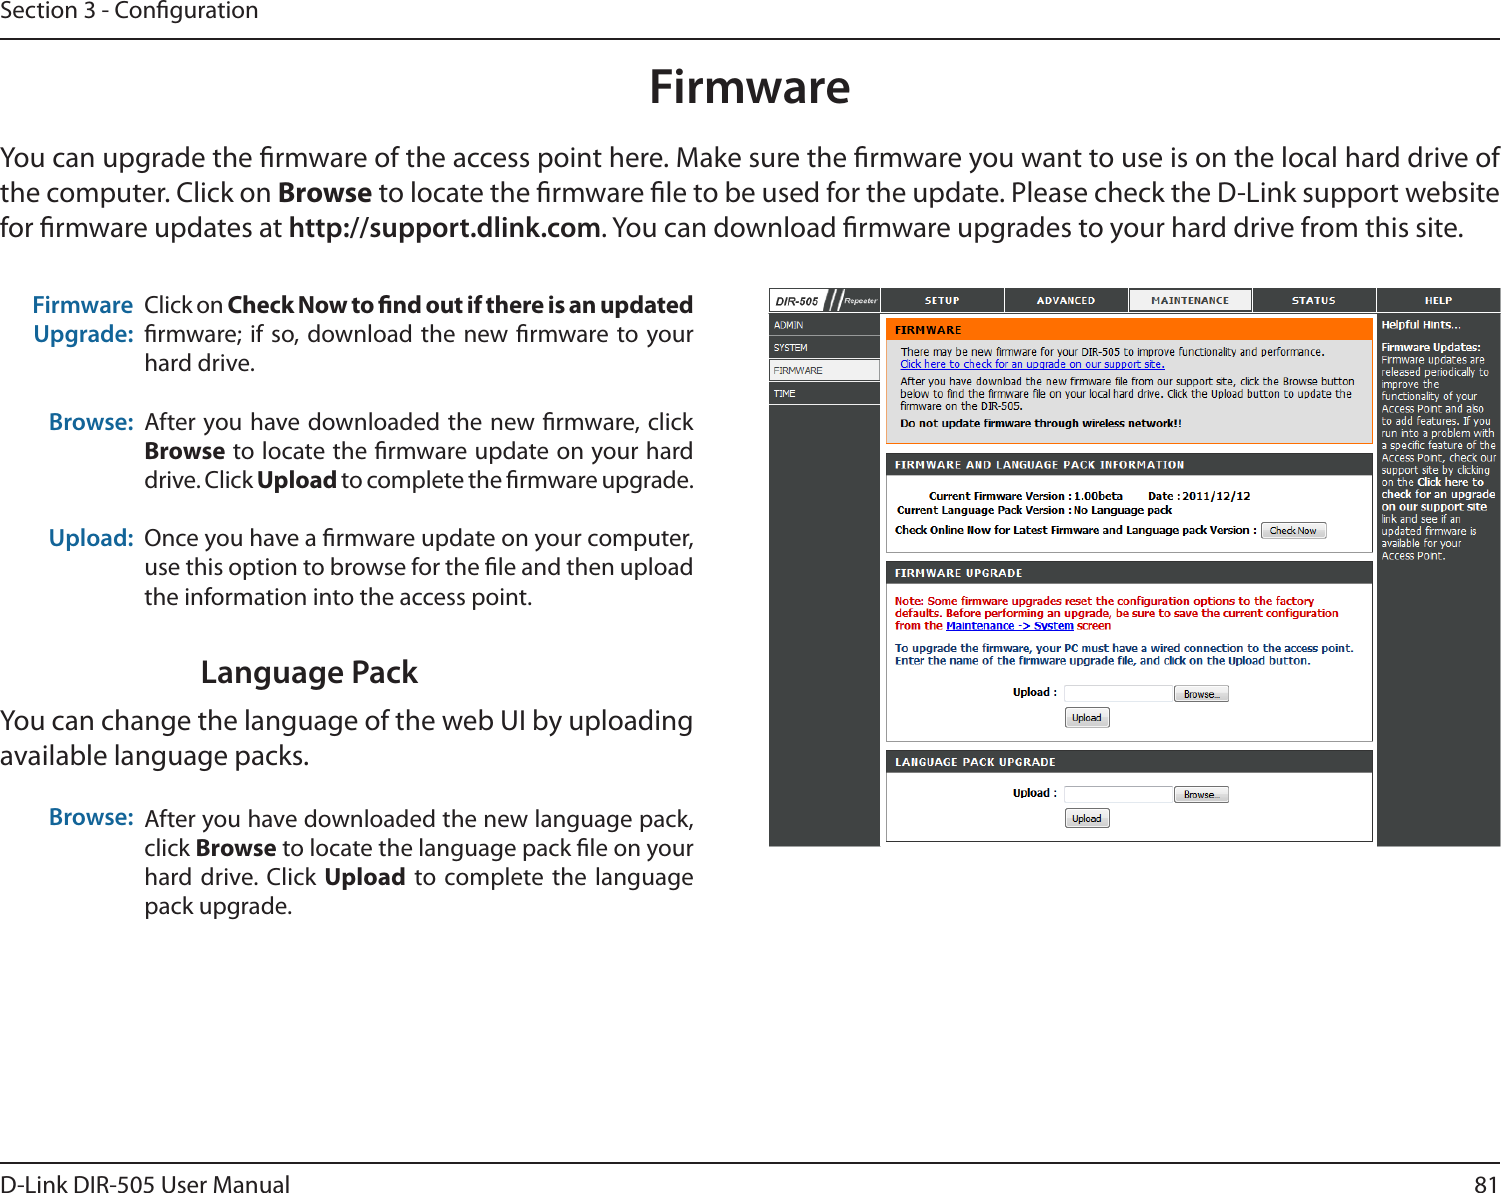 81D-Link DIR-505 User ManualSection 3 - CongurationFirmwareUpgrade: Browse:Upload:Click on Check Now to nd out if there is an updated rmware; if  so, download the new rmware to your hard drive.After you have downloaded the new rmware, click Browse to locate the rmware update on your hard drive. Click Upload to complete the rmware upgrade.Once you have a rmware update on your computer, use this option to browse for the le and then upload the information into the access point. FirmwareYou can upgrade the rmware of the access point here. Make sure the rmware you want to use is on the local hard drive of the computer. Click on Browse to locate the rmware le to be used for the update. Please check the D-Link support website for rmware updates at http://support.dlink.com. You can download rmware upgrades to your hard drive from this site.After you have downloaded the new language pack, click Browse to locate the language pack le on your hard drive. Click  Upload to complete the language pack upgrade.Language PackYou can change the language of the web UI by uploading available language packs.Browse: